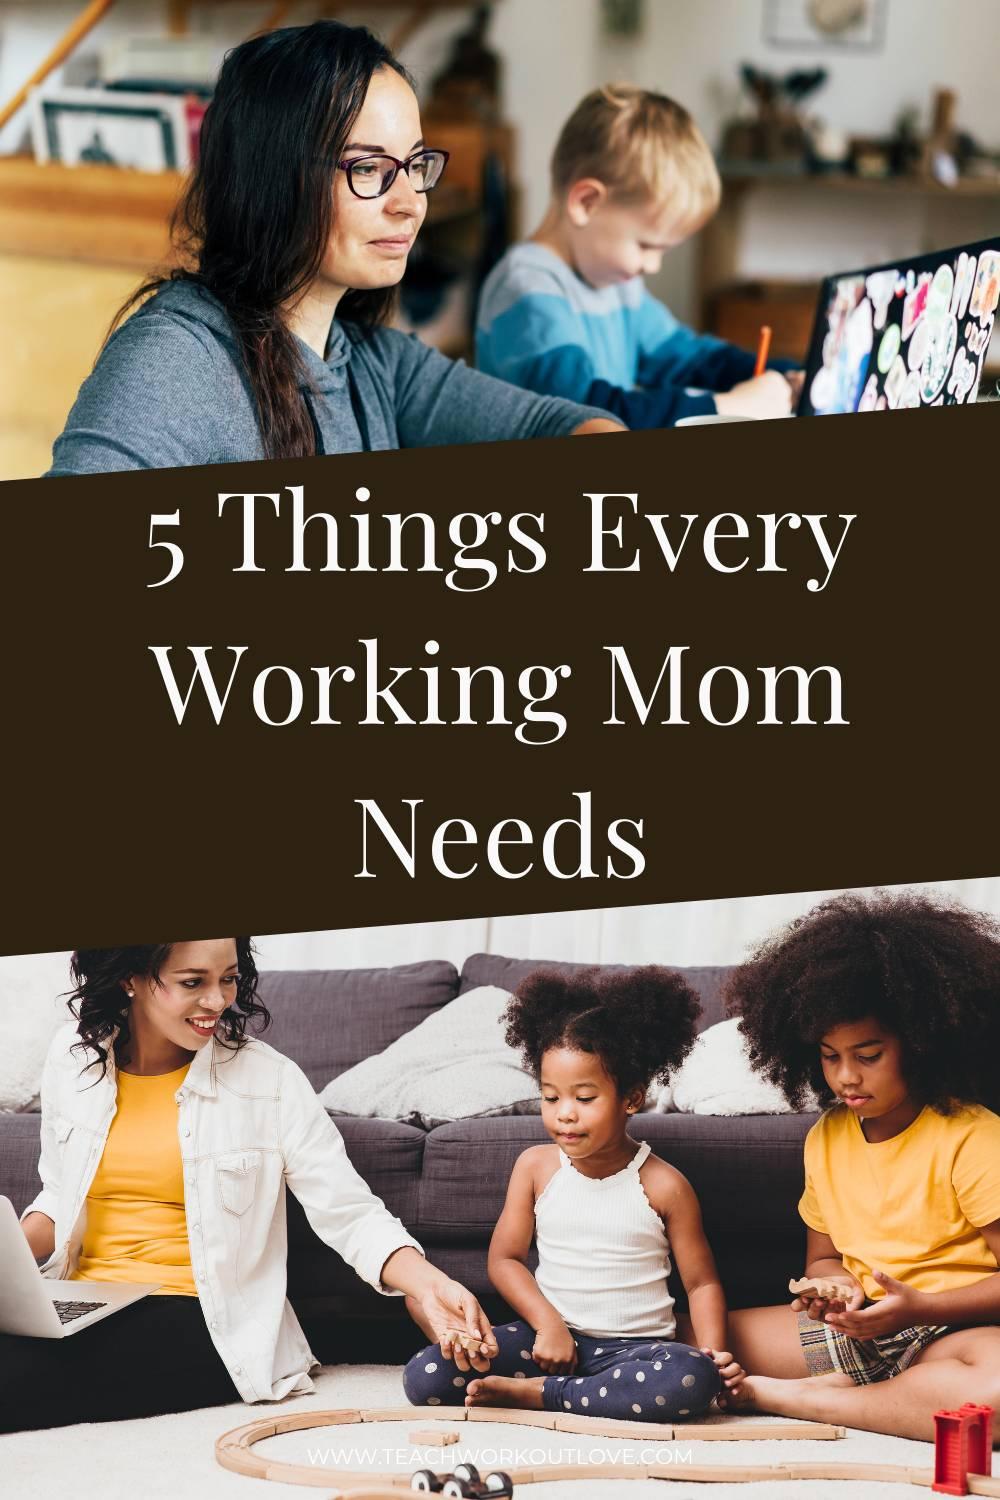 Here's some must-have items for working moms that you can get to make your family to work life even easier.